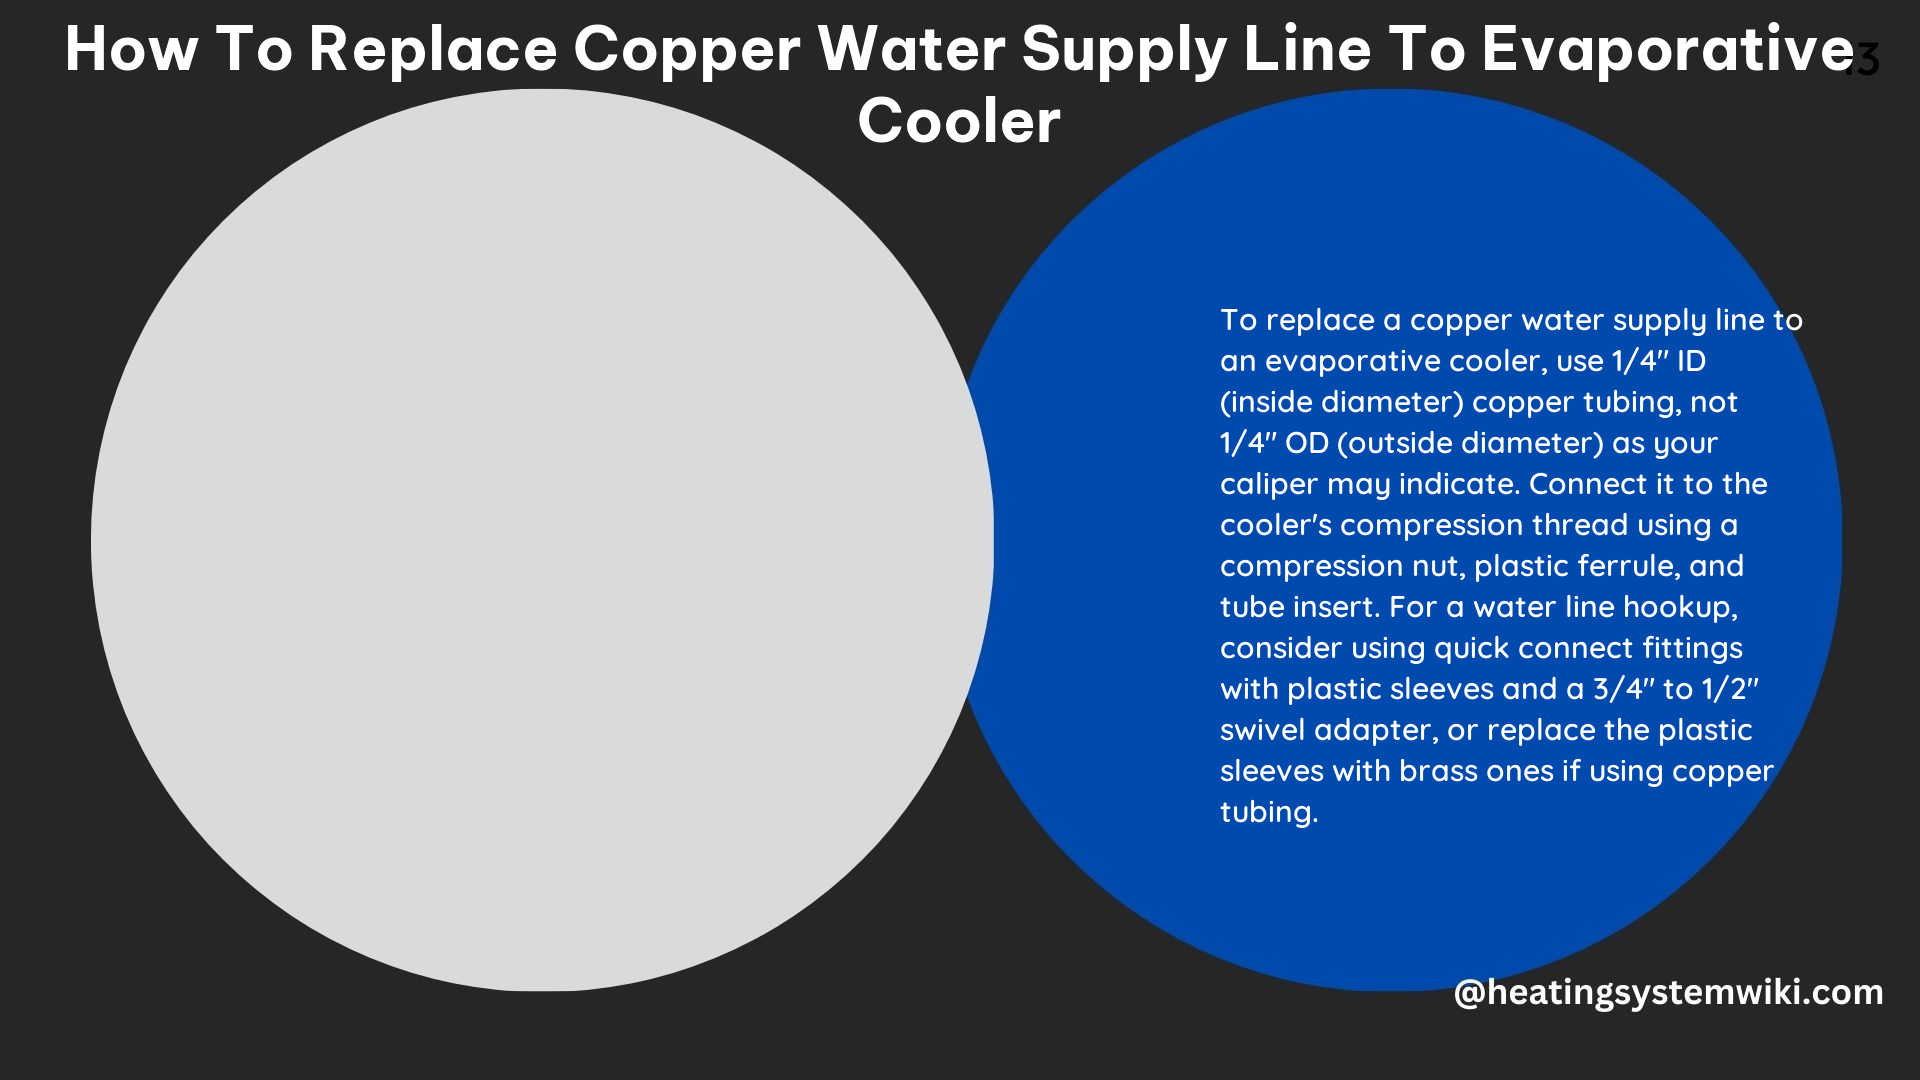 How to Replace Copper Water Supply Line to Evaporative Cooler